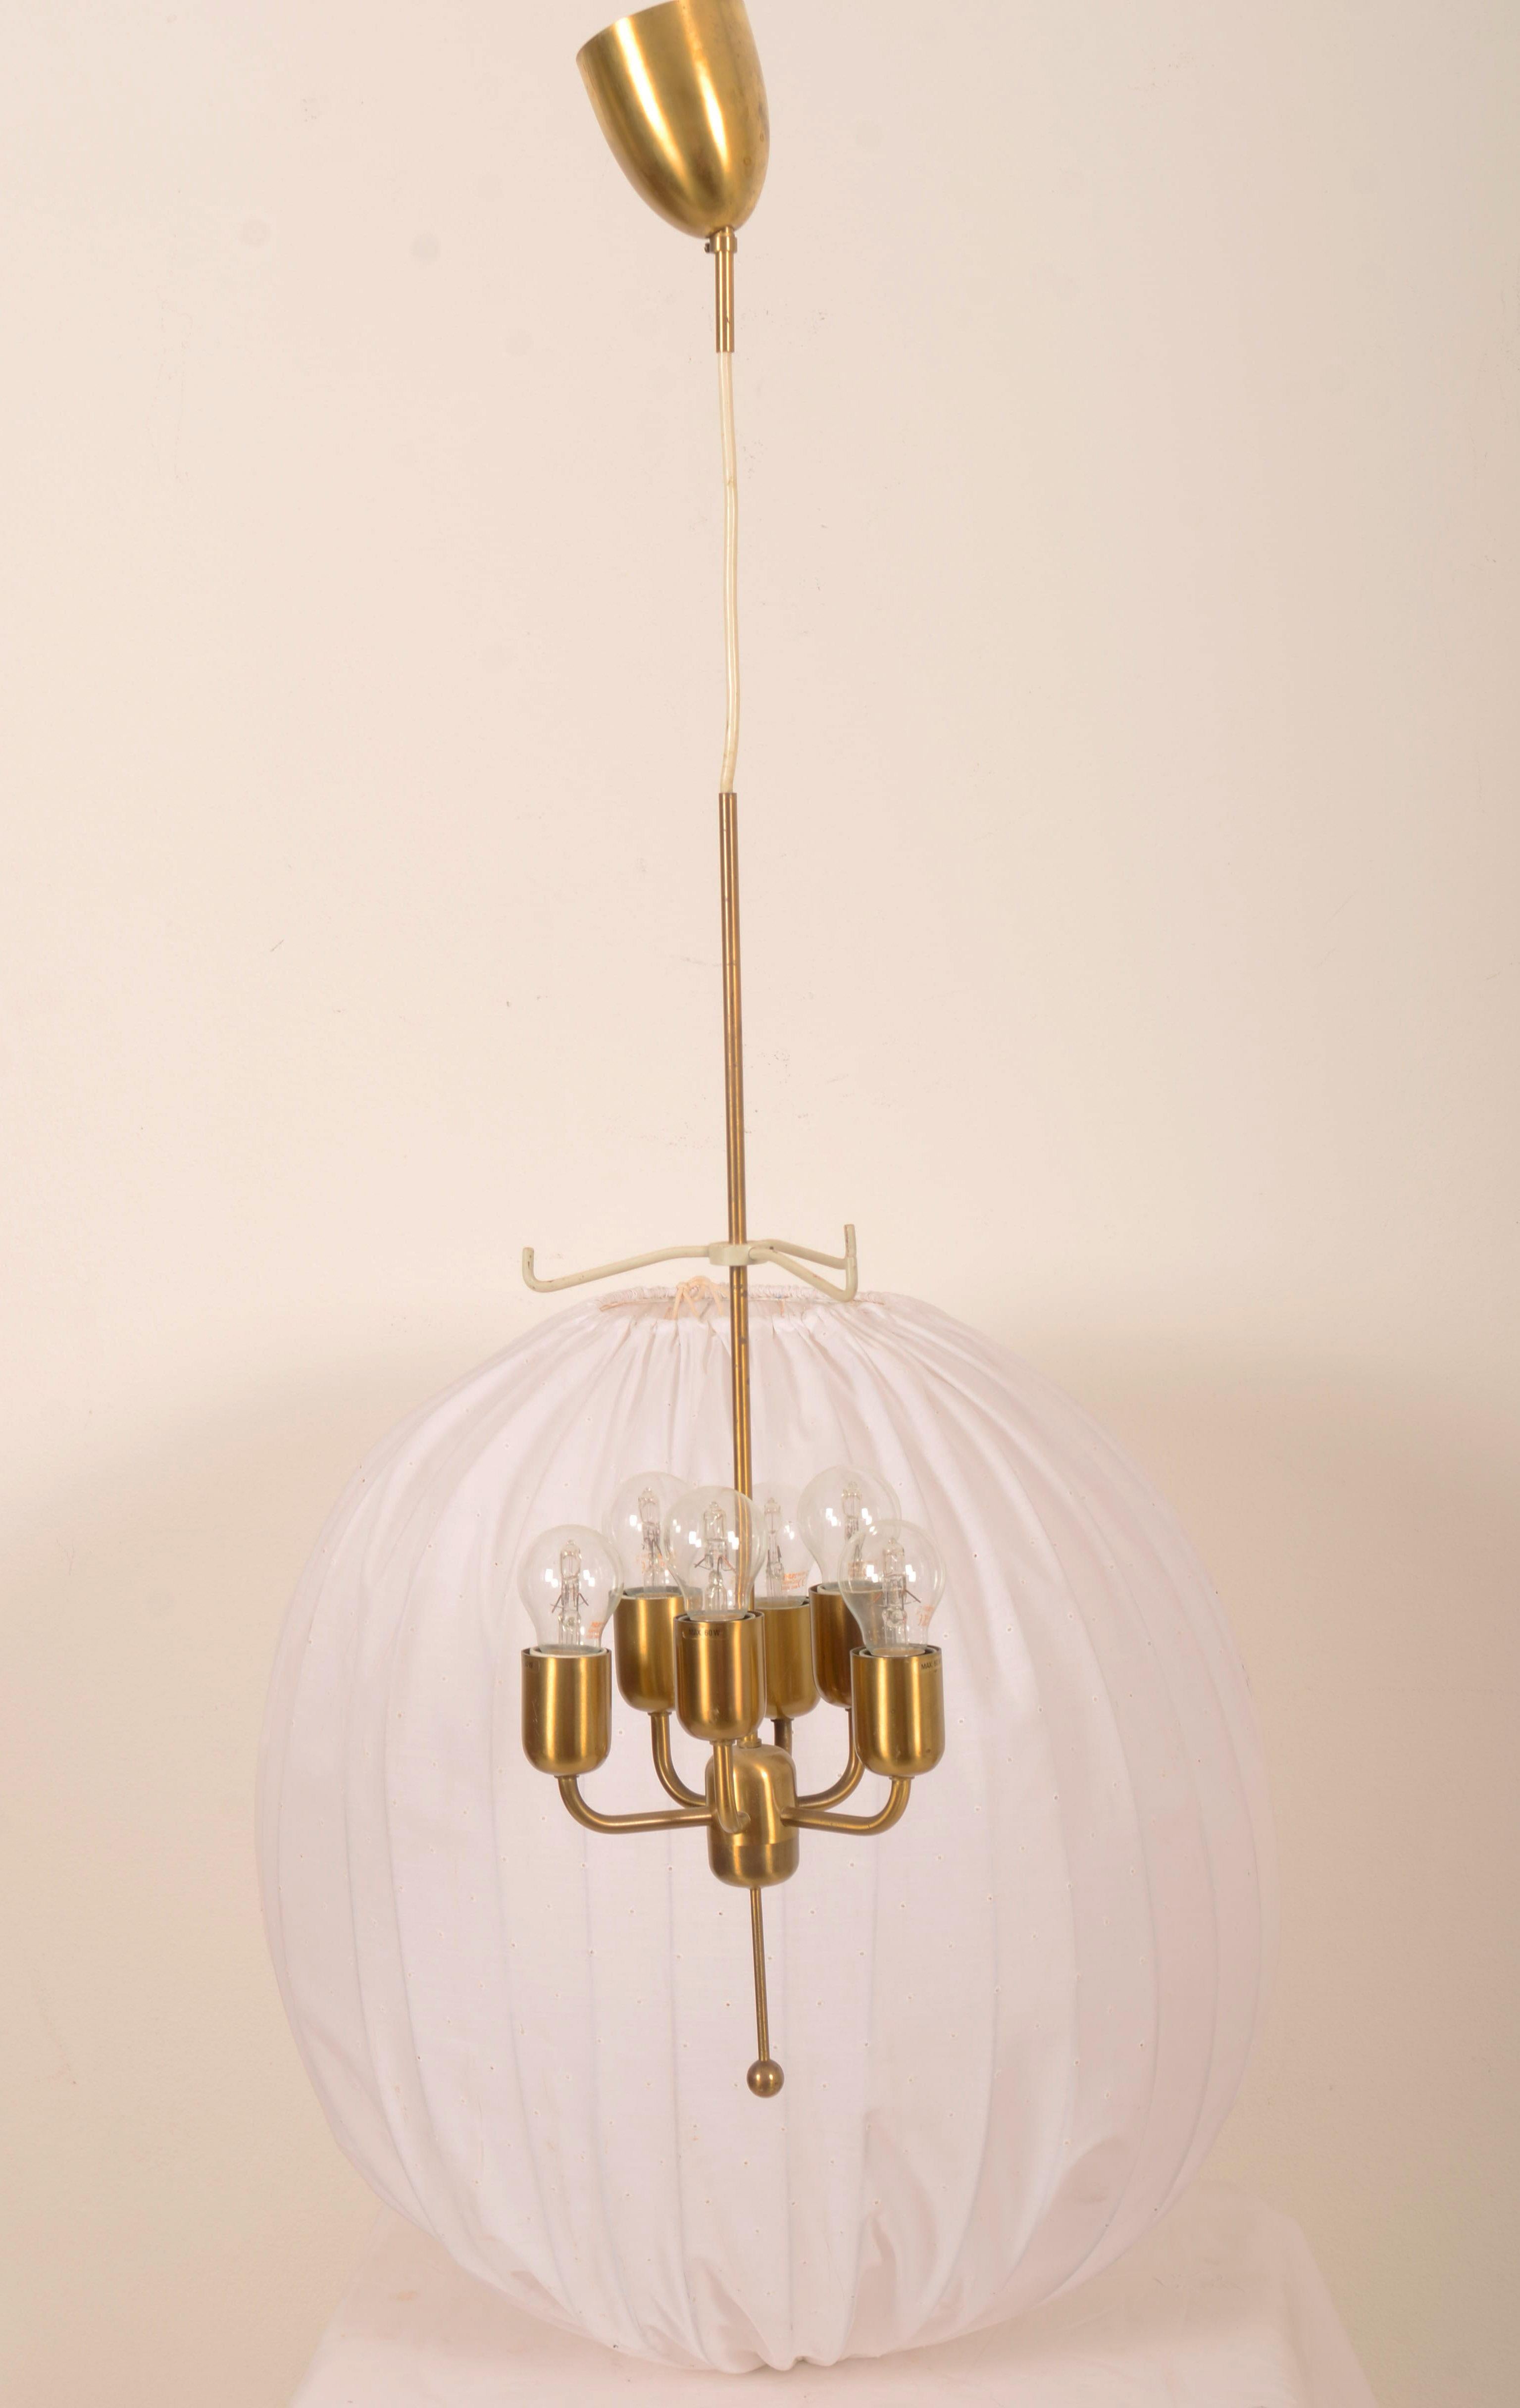 Rare large ceiling pendant with spheric shade in cream/white fabric on white lacquered metal mount. 
Model Carolin T549/6 in brass designed 1963 by Hans-Agne Jakobsson. Lamp itself and the shade are height adjustable.
6 x E27 bulbs.